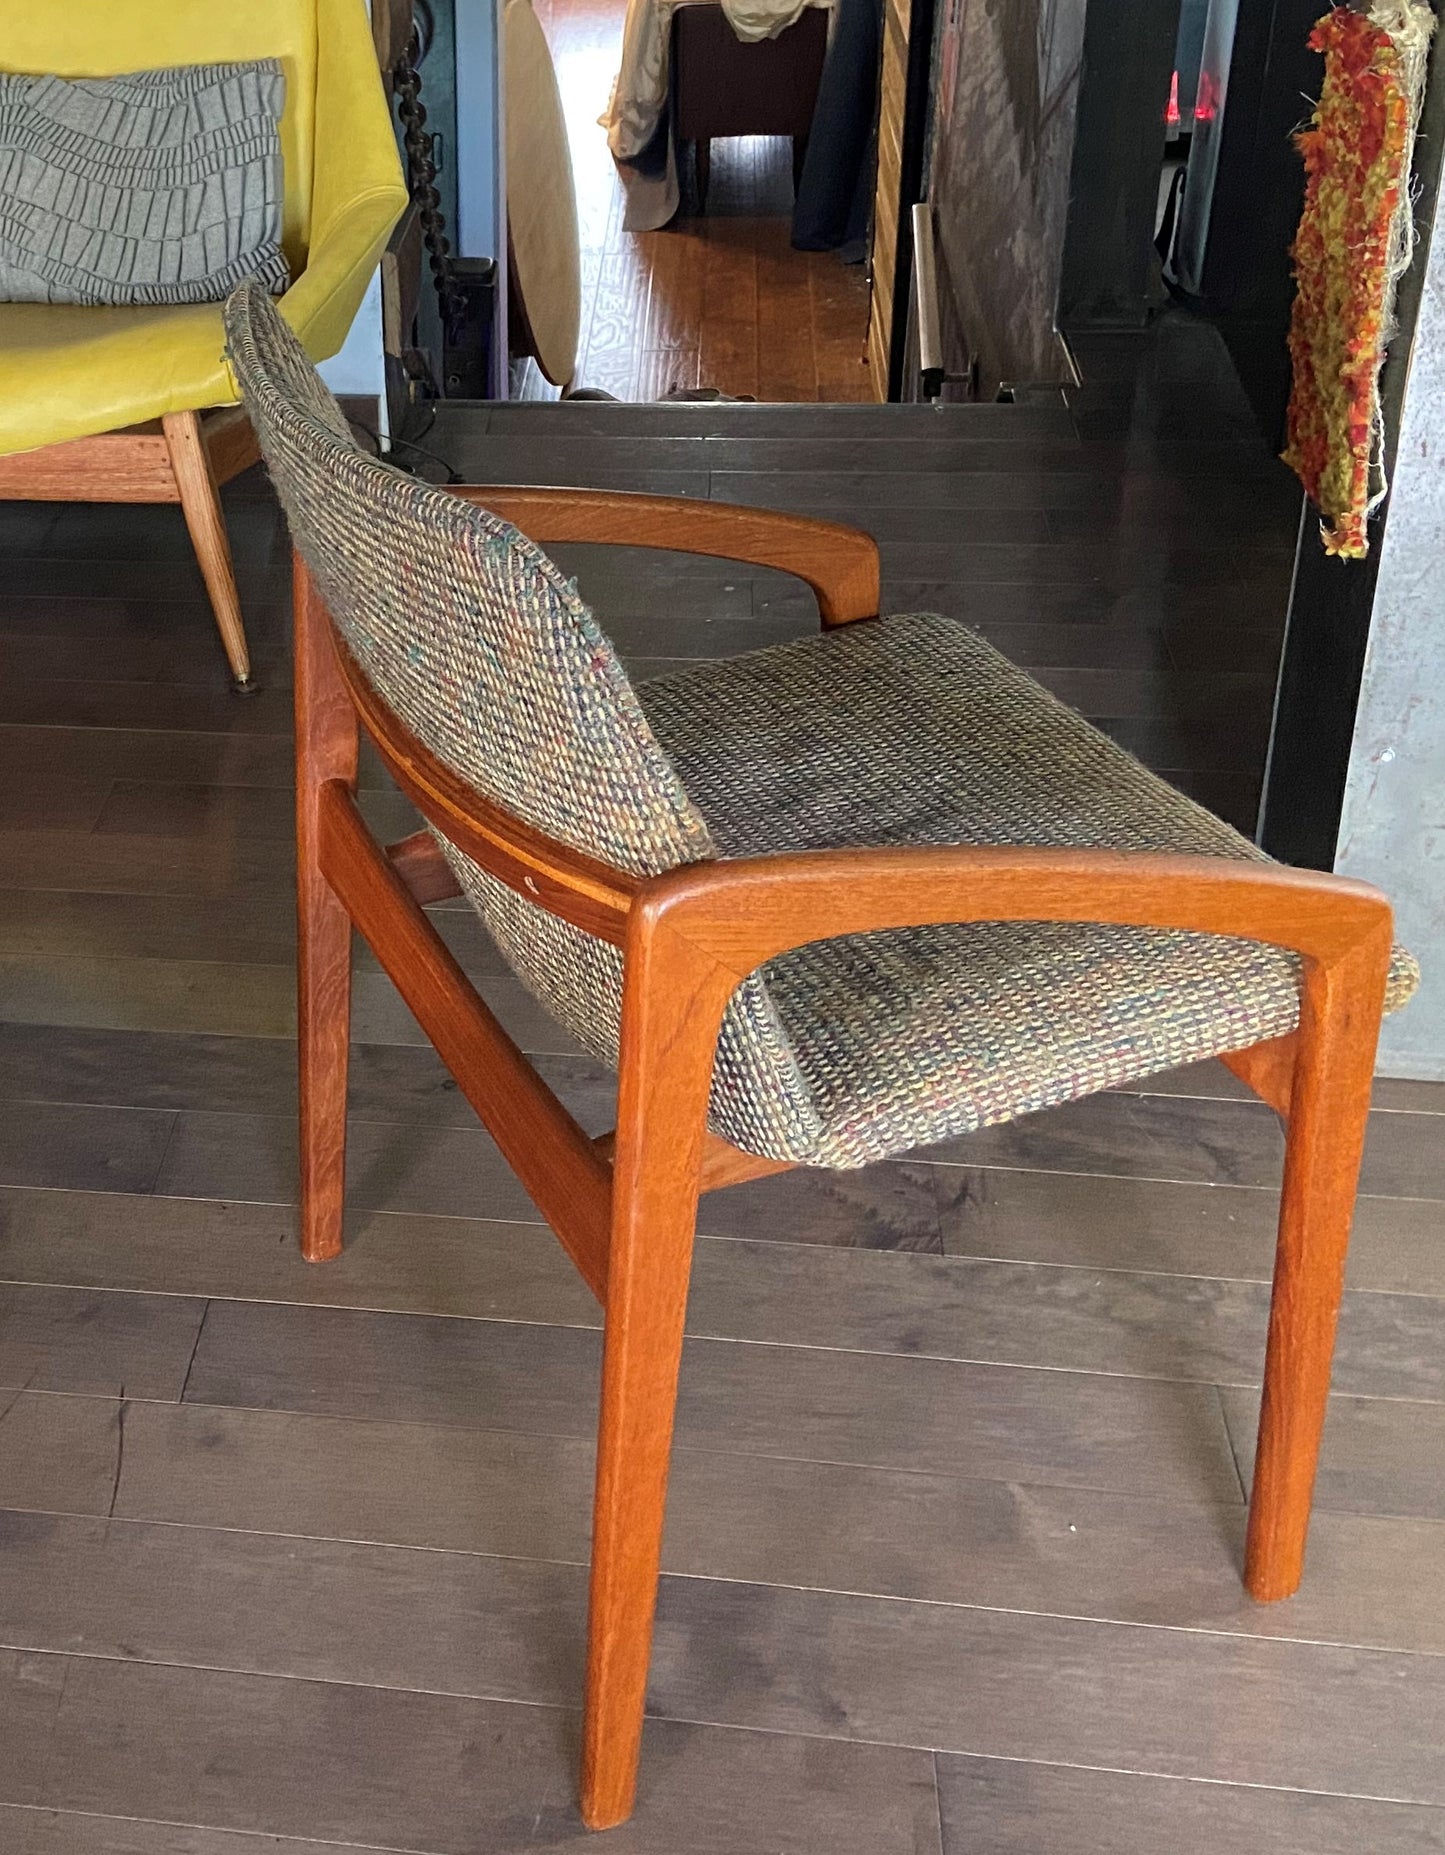 6 REFINISHED Danish MCM Teak Armchairs by Kai Kristiansen, ready for new upholstery